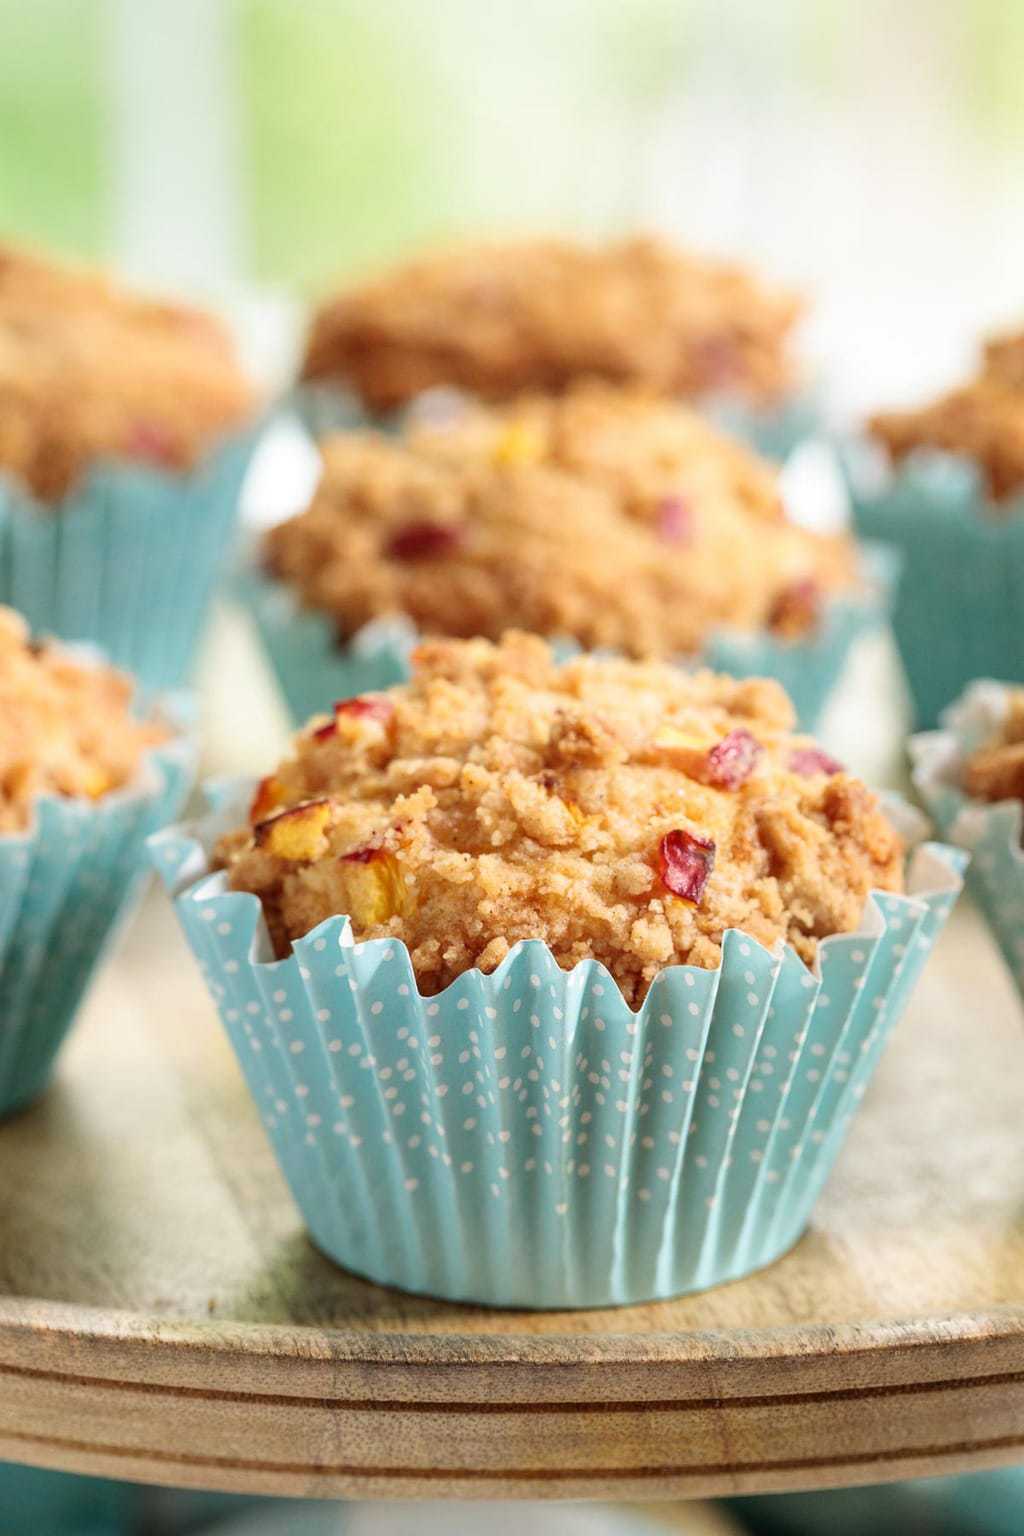 Vertical closeup photo of Peach Crumble Muffins in turquoise muffin liners on a wood serving platter.